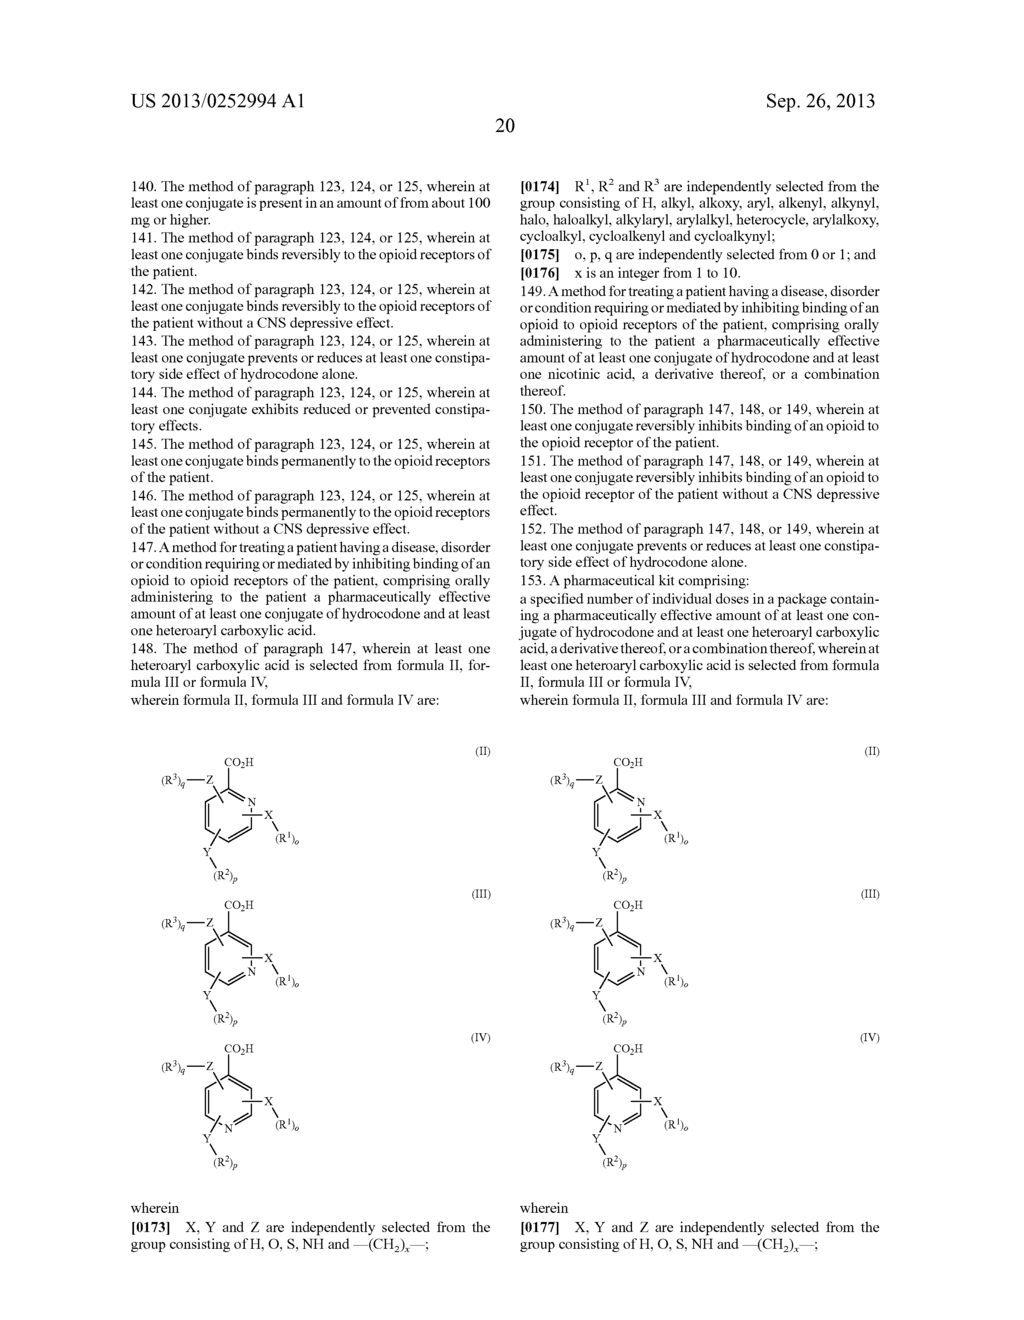 Benzoic Acid, Benzoic Acid Derivatives and Heteroaryl Carboxylic Acid     Conjugates of Hydrocodone, Prodrugs, Methods of Making and Use Thereof - diagram, schematic, and image 36